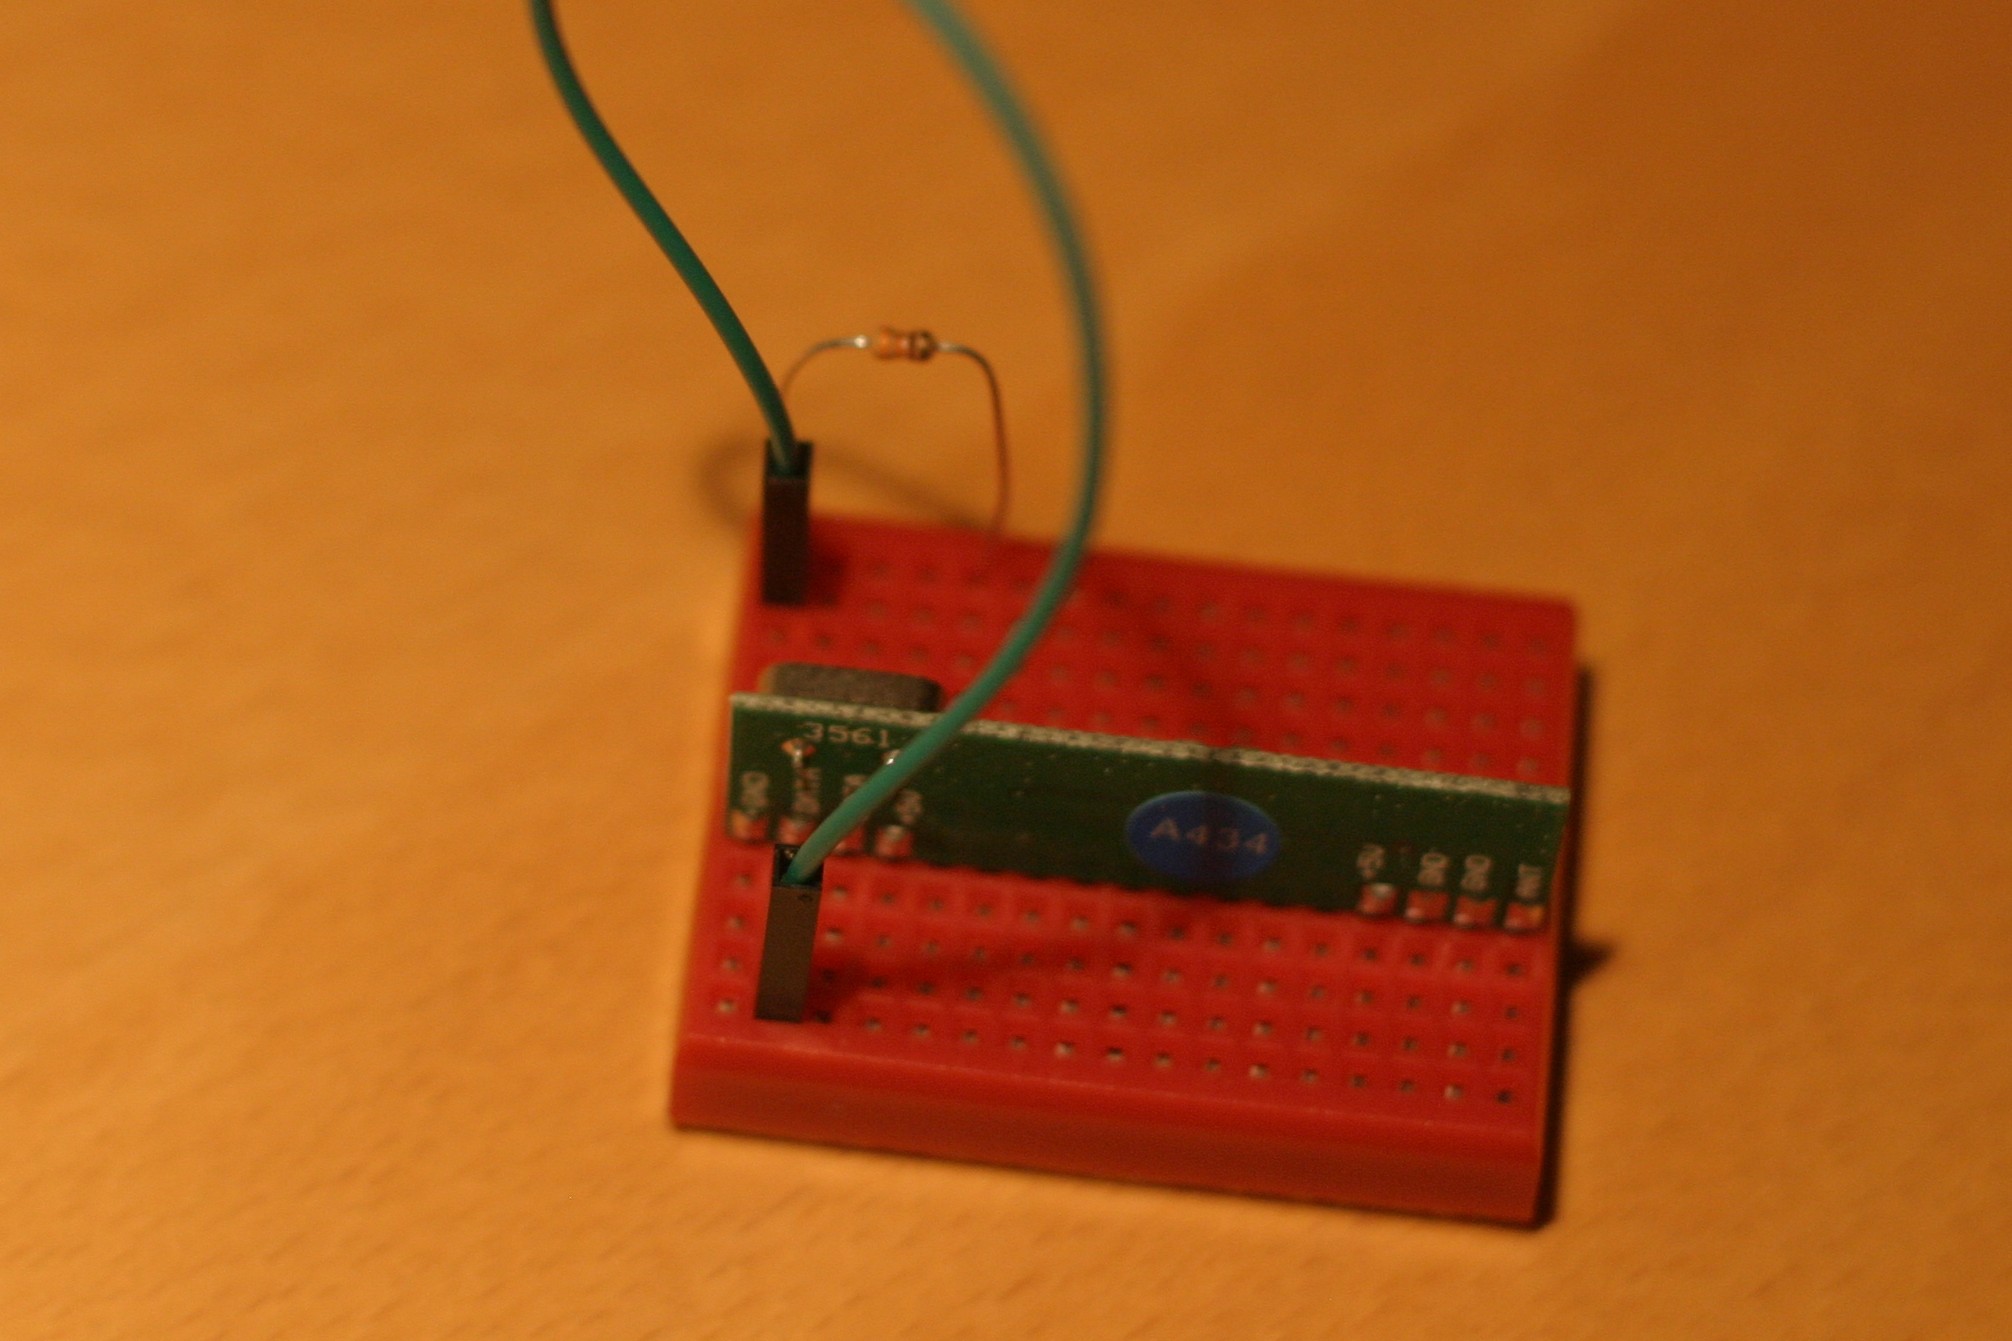 Resistor connected to data pin